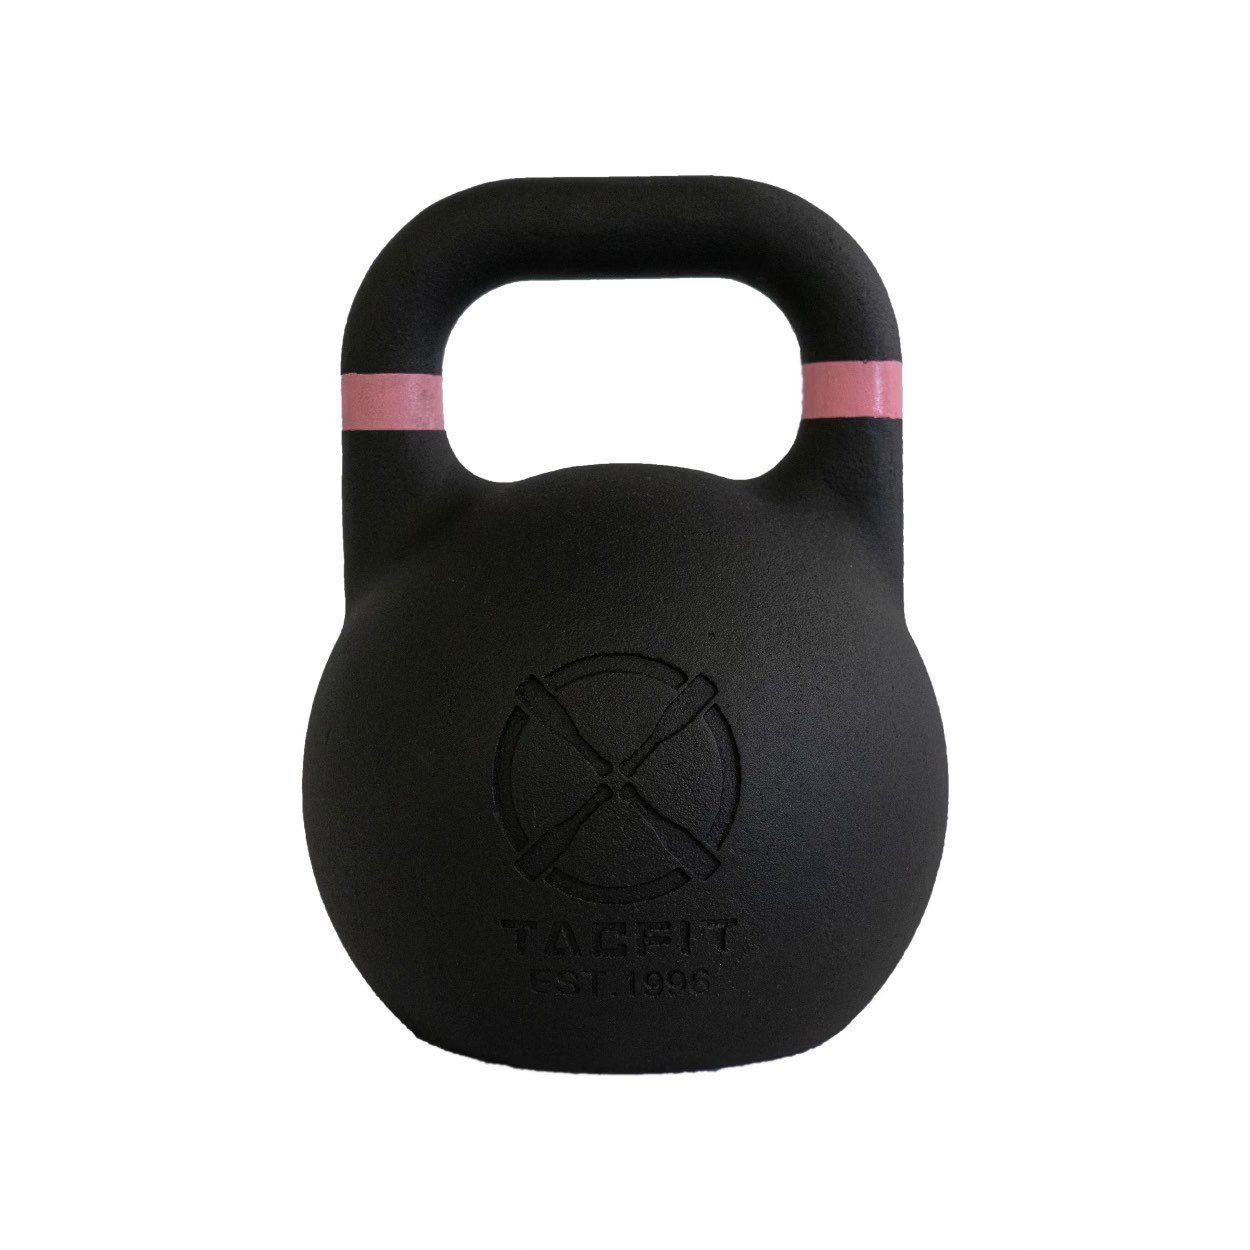 Competition Kettlebell 18lb - 70lb, Weights & Fitness